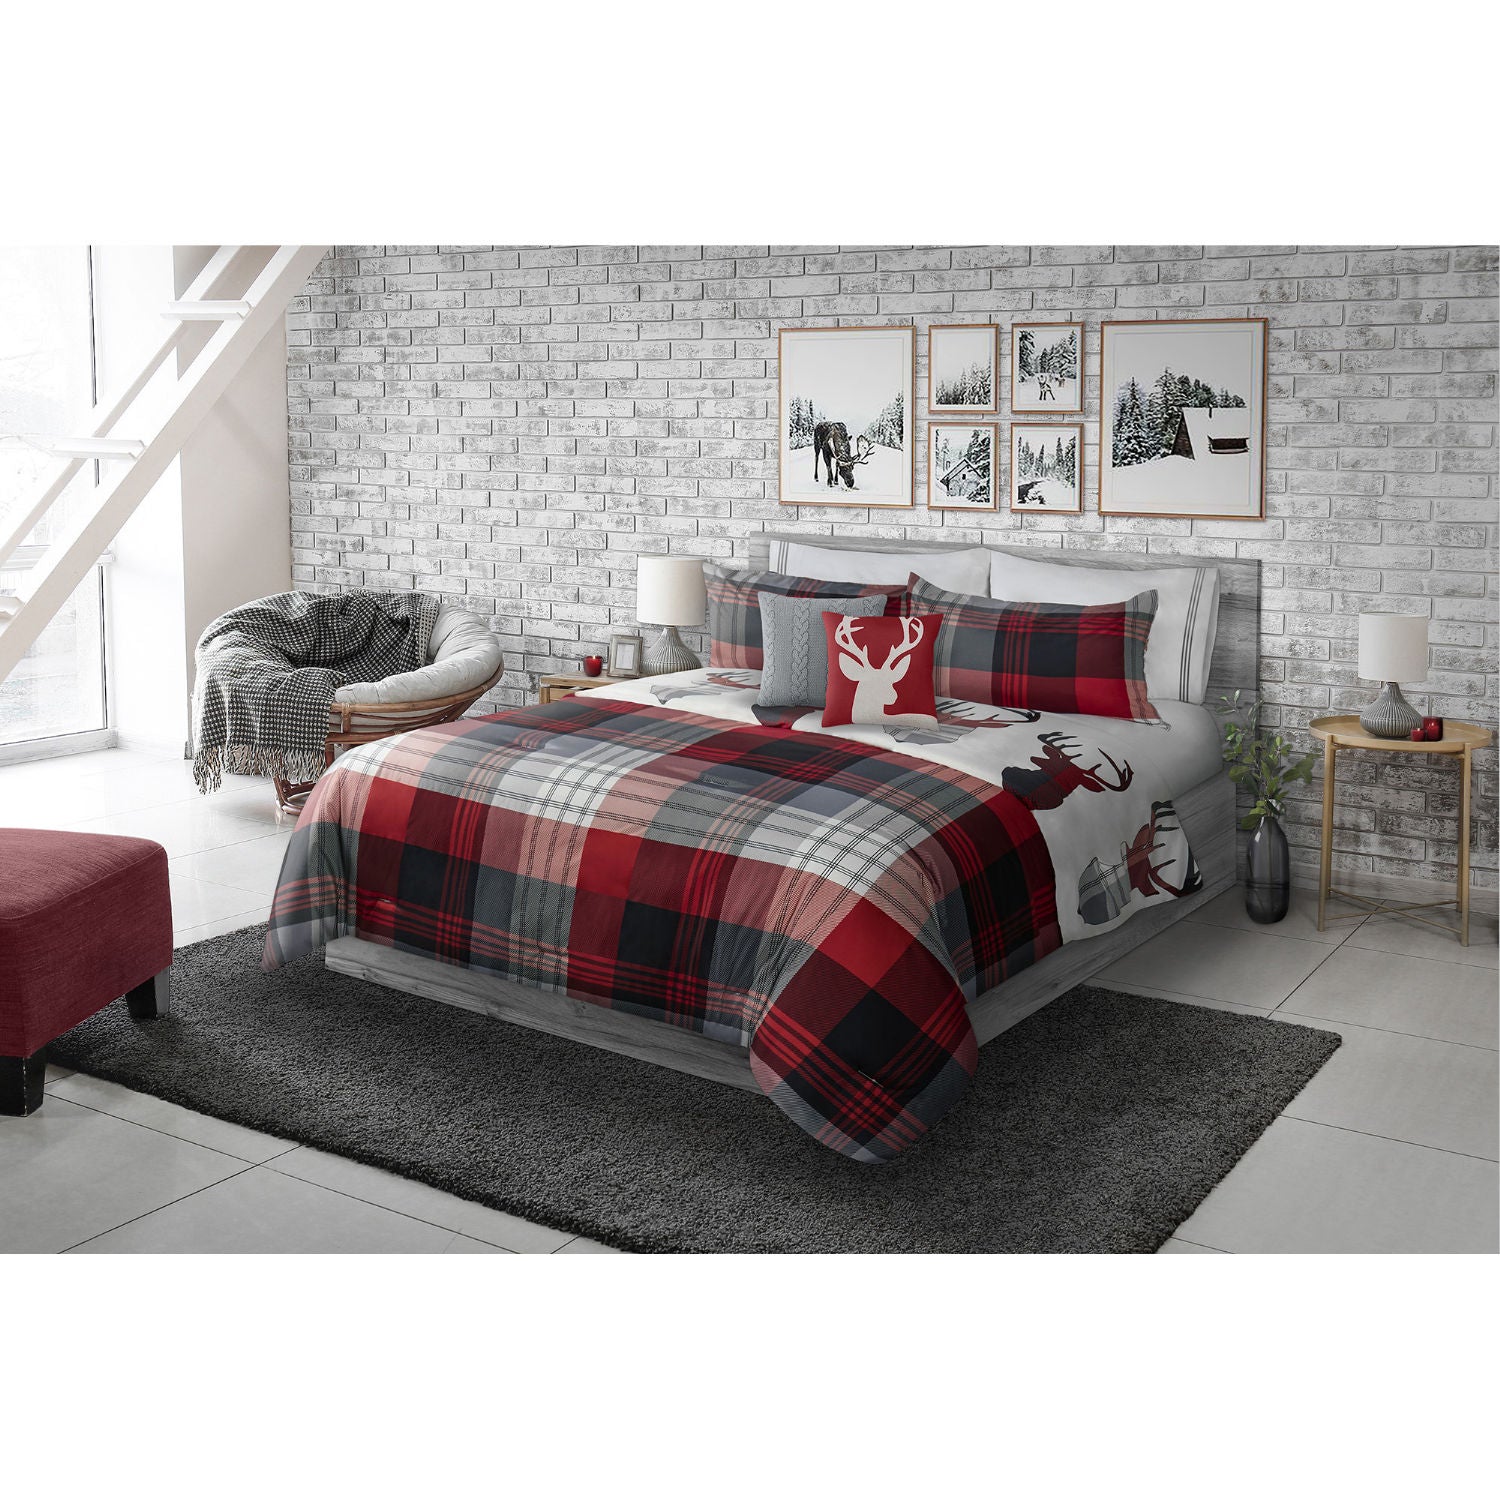 Woven Reversible/Comforter 2 Piece Set Twin Classic Red Plaid